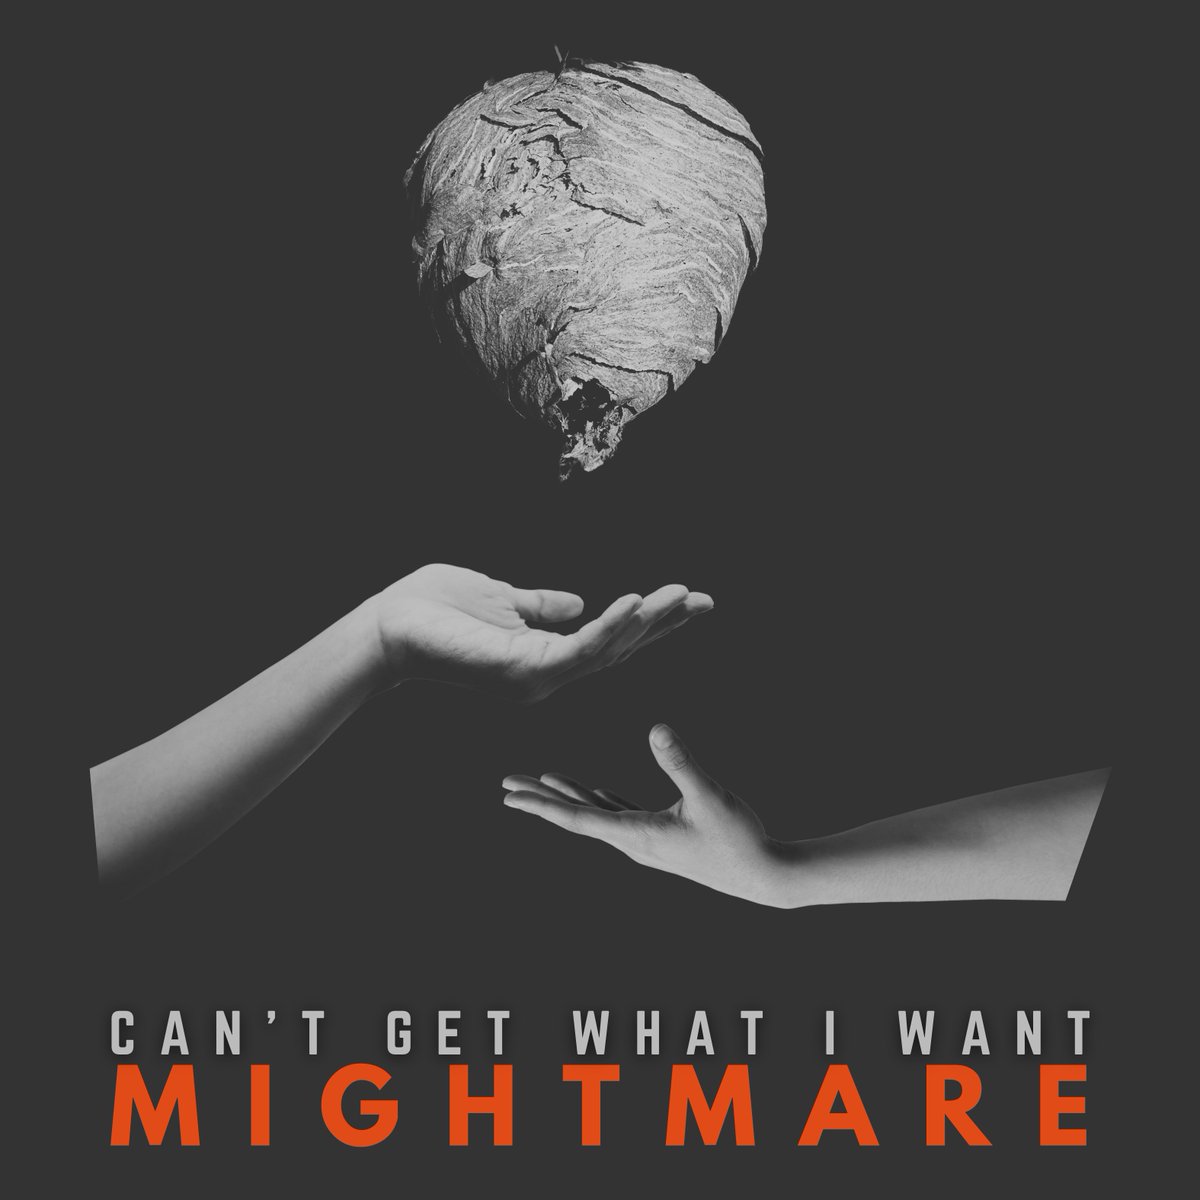 New @_mightmare is here! 'Can't Get What I Want' is officially OUT NOW on Kill Rock Stars! Listen here: pocp.co/cant-get-what-…